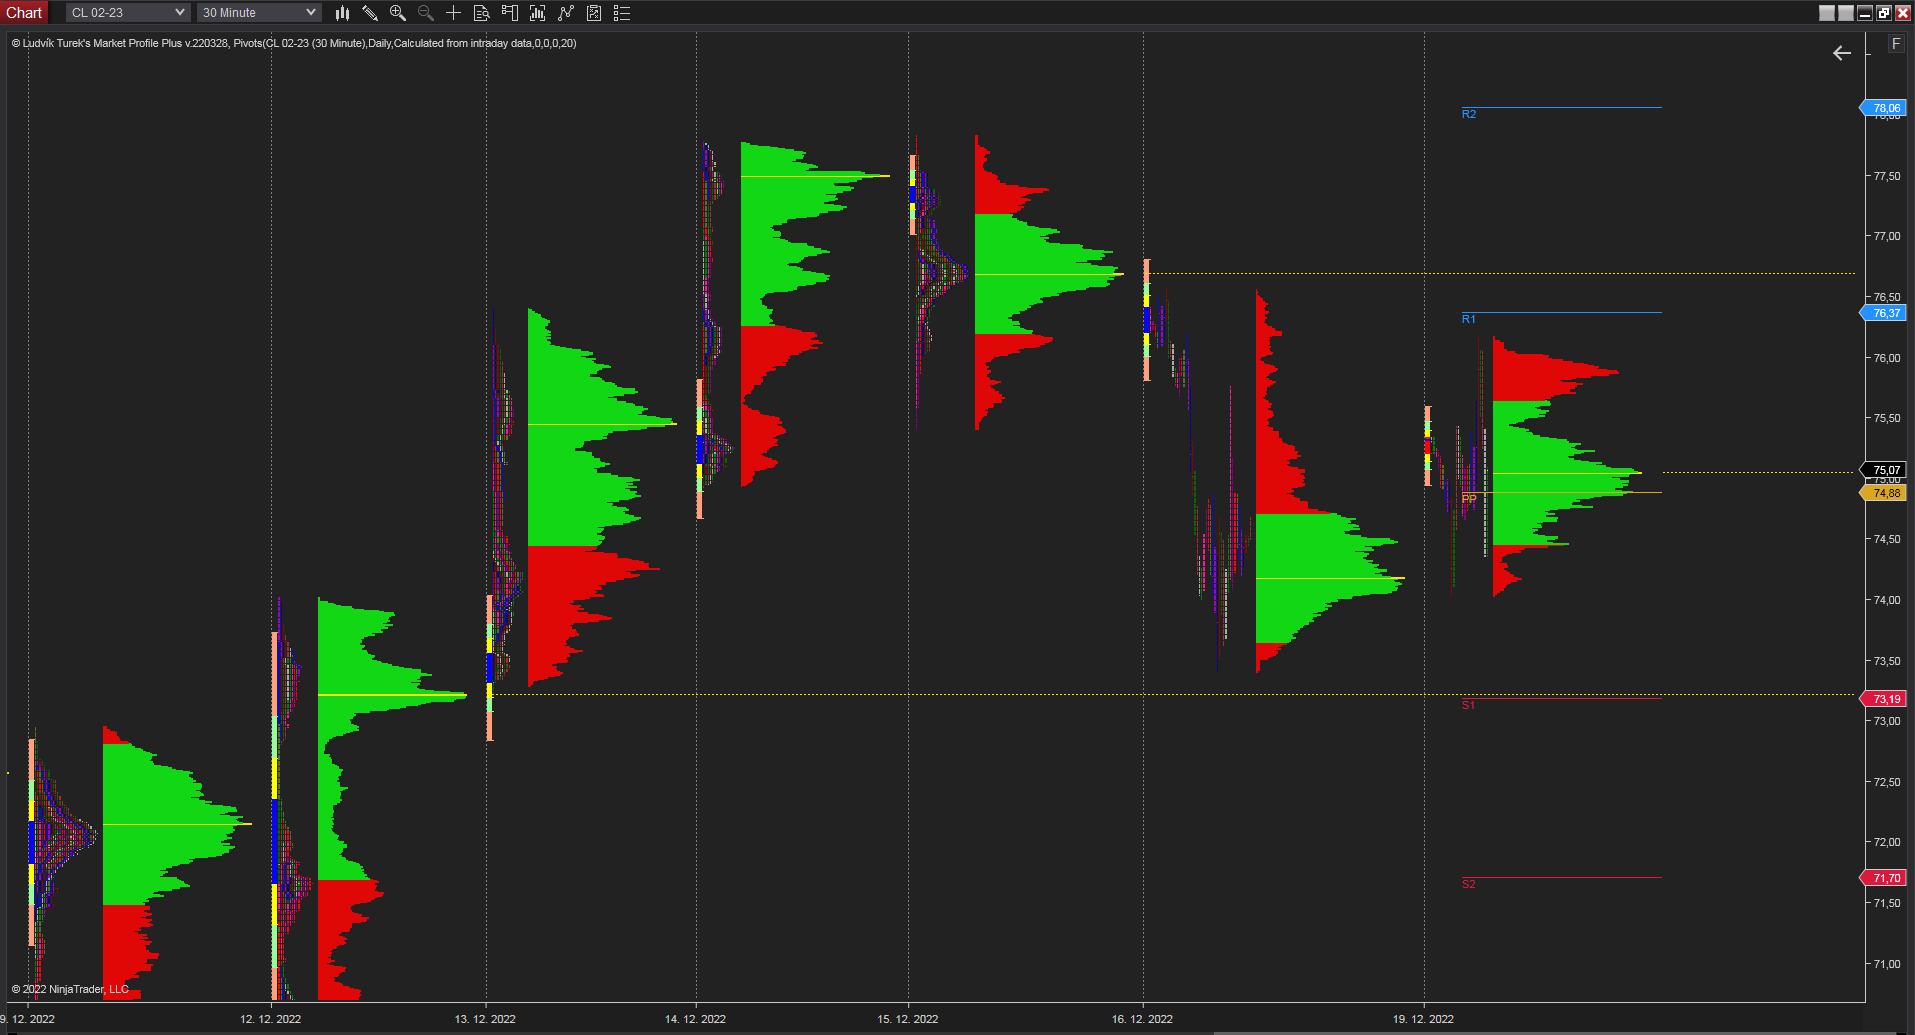 30 minutes chart of CL (Crude Oil Futures), Daily Market Profile. Source: Author's analysis